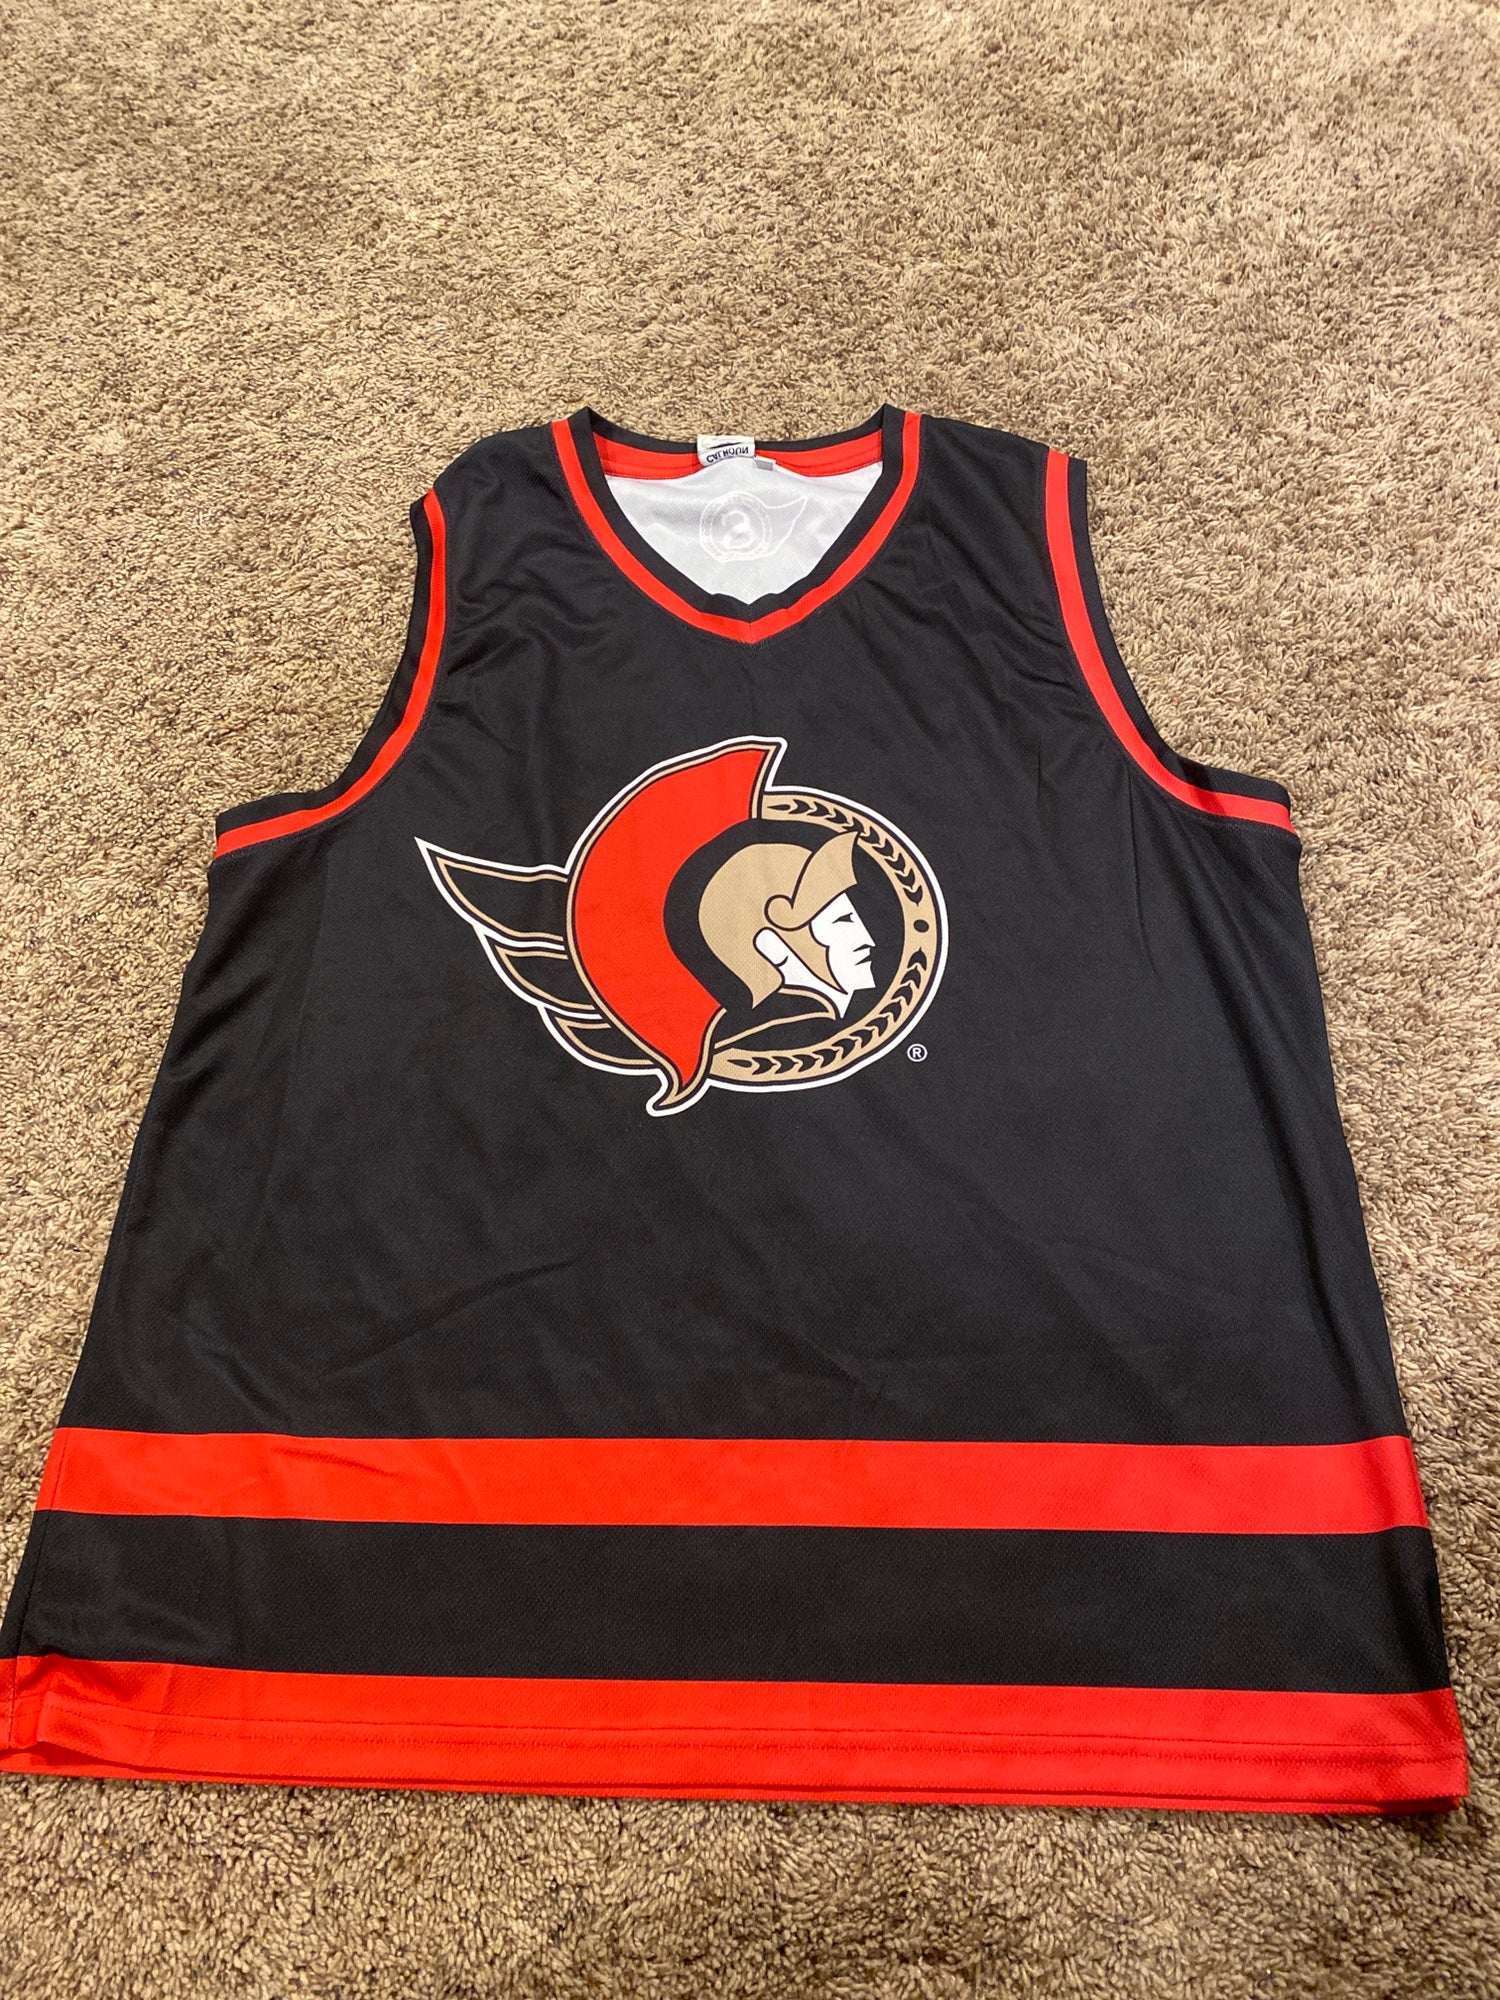 Bench Clearers Cleveland Monsters Hockey Tank - XL / Black / Polyester